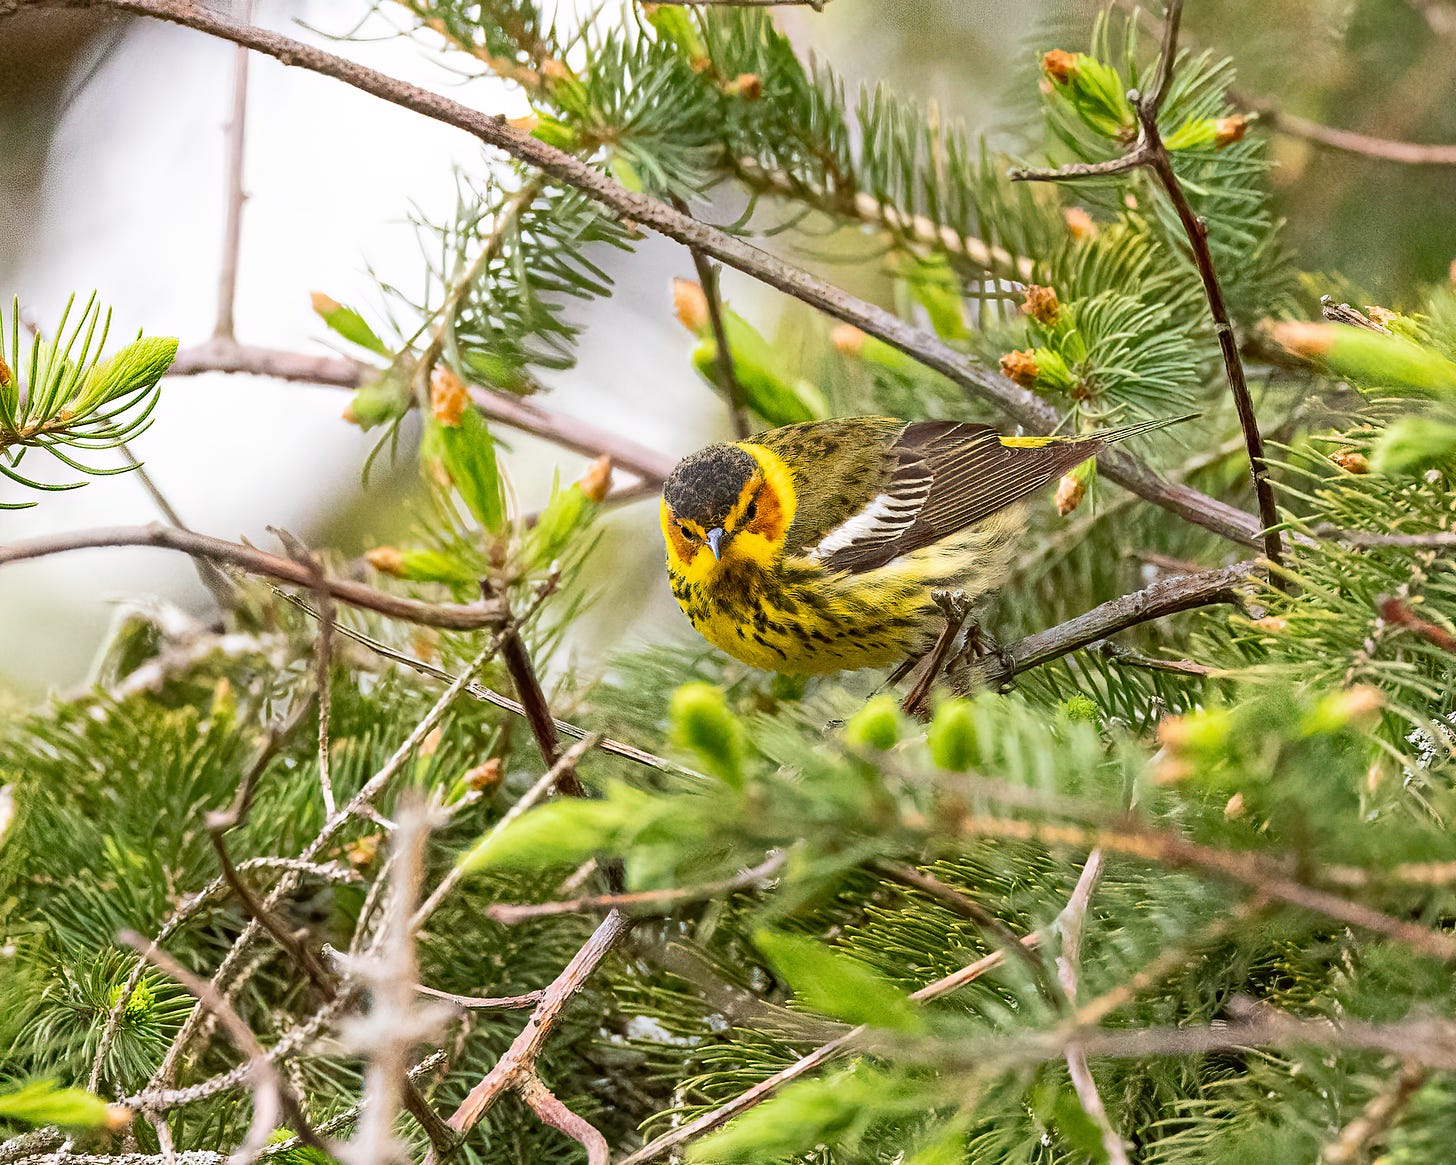 A Cape May Warbler perches in an evergreen. It is a yellow warbler with rusty cheeks and a black cap. It also has a white wing bar and a black speckled chest.